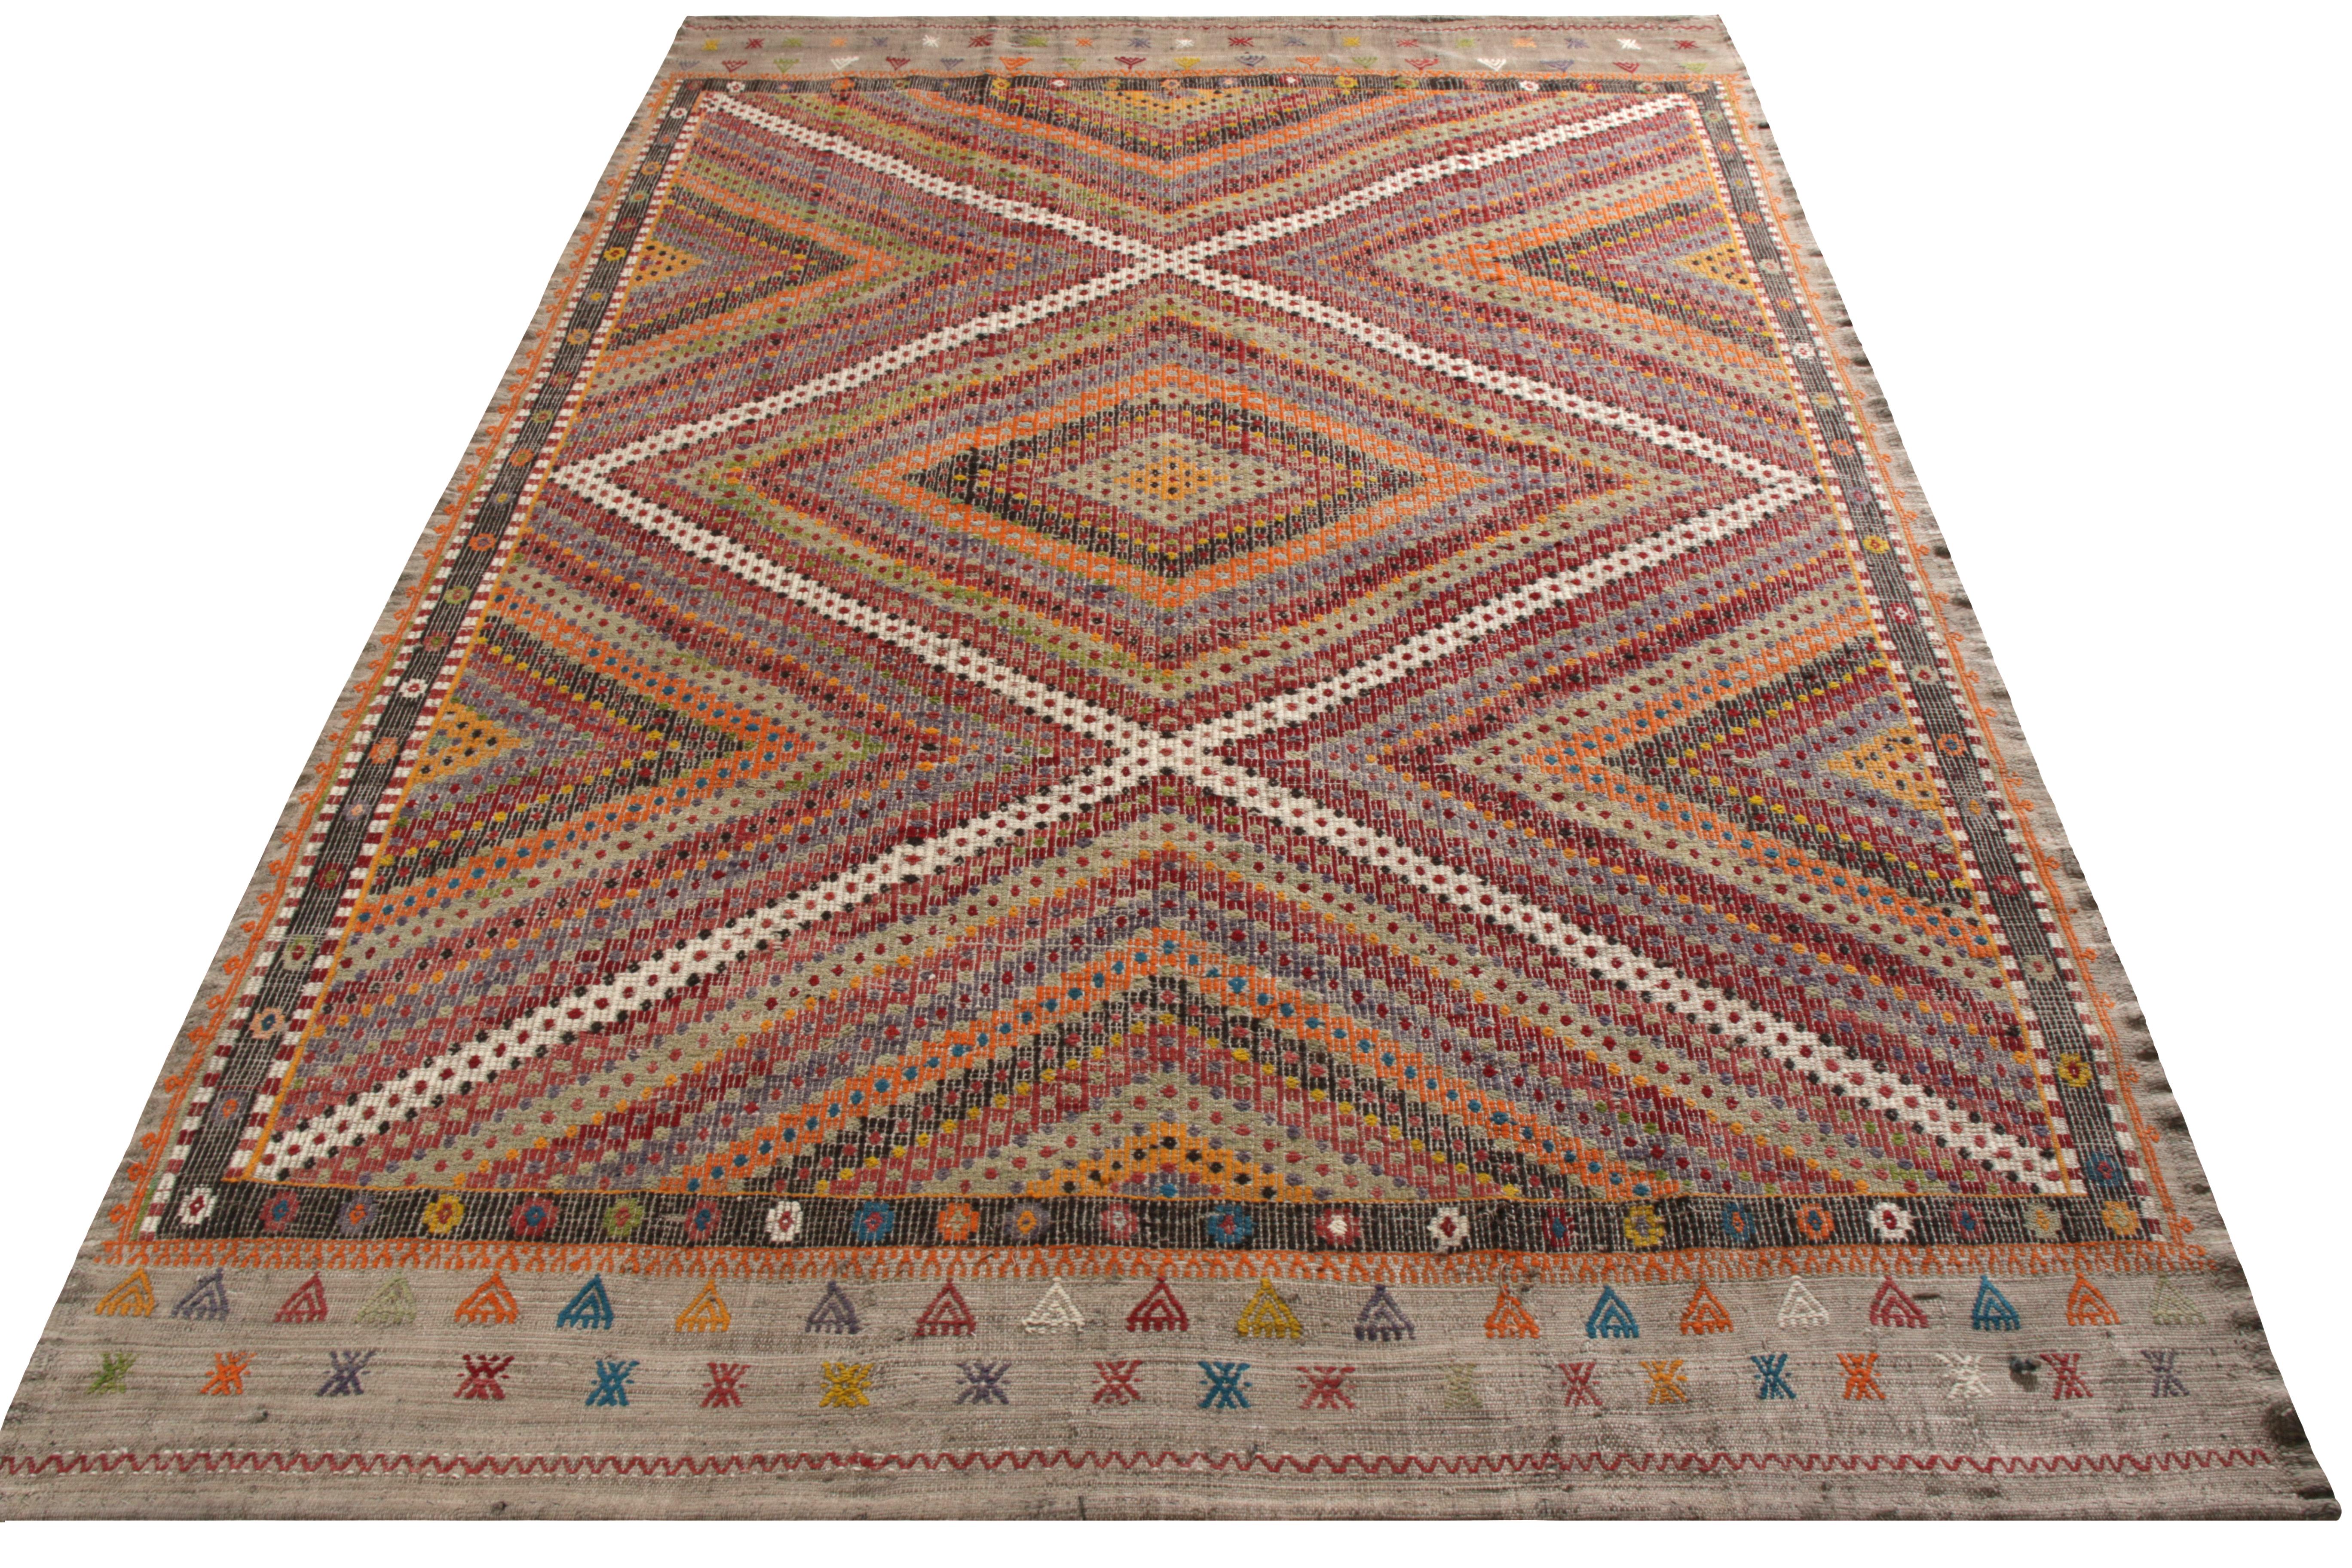 A vintage 6 x 9 Kilim rug of a seldom-seen, high-low embroidery weave—handwoven in wool originating from Turkey, circa 1950-1960. A fabulous marriage of tribal color and geometry with the textural element for a warm, comfortable choice underfoot.